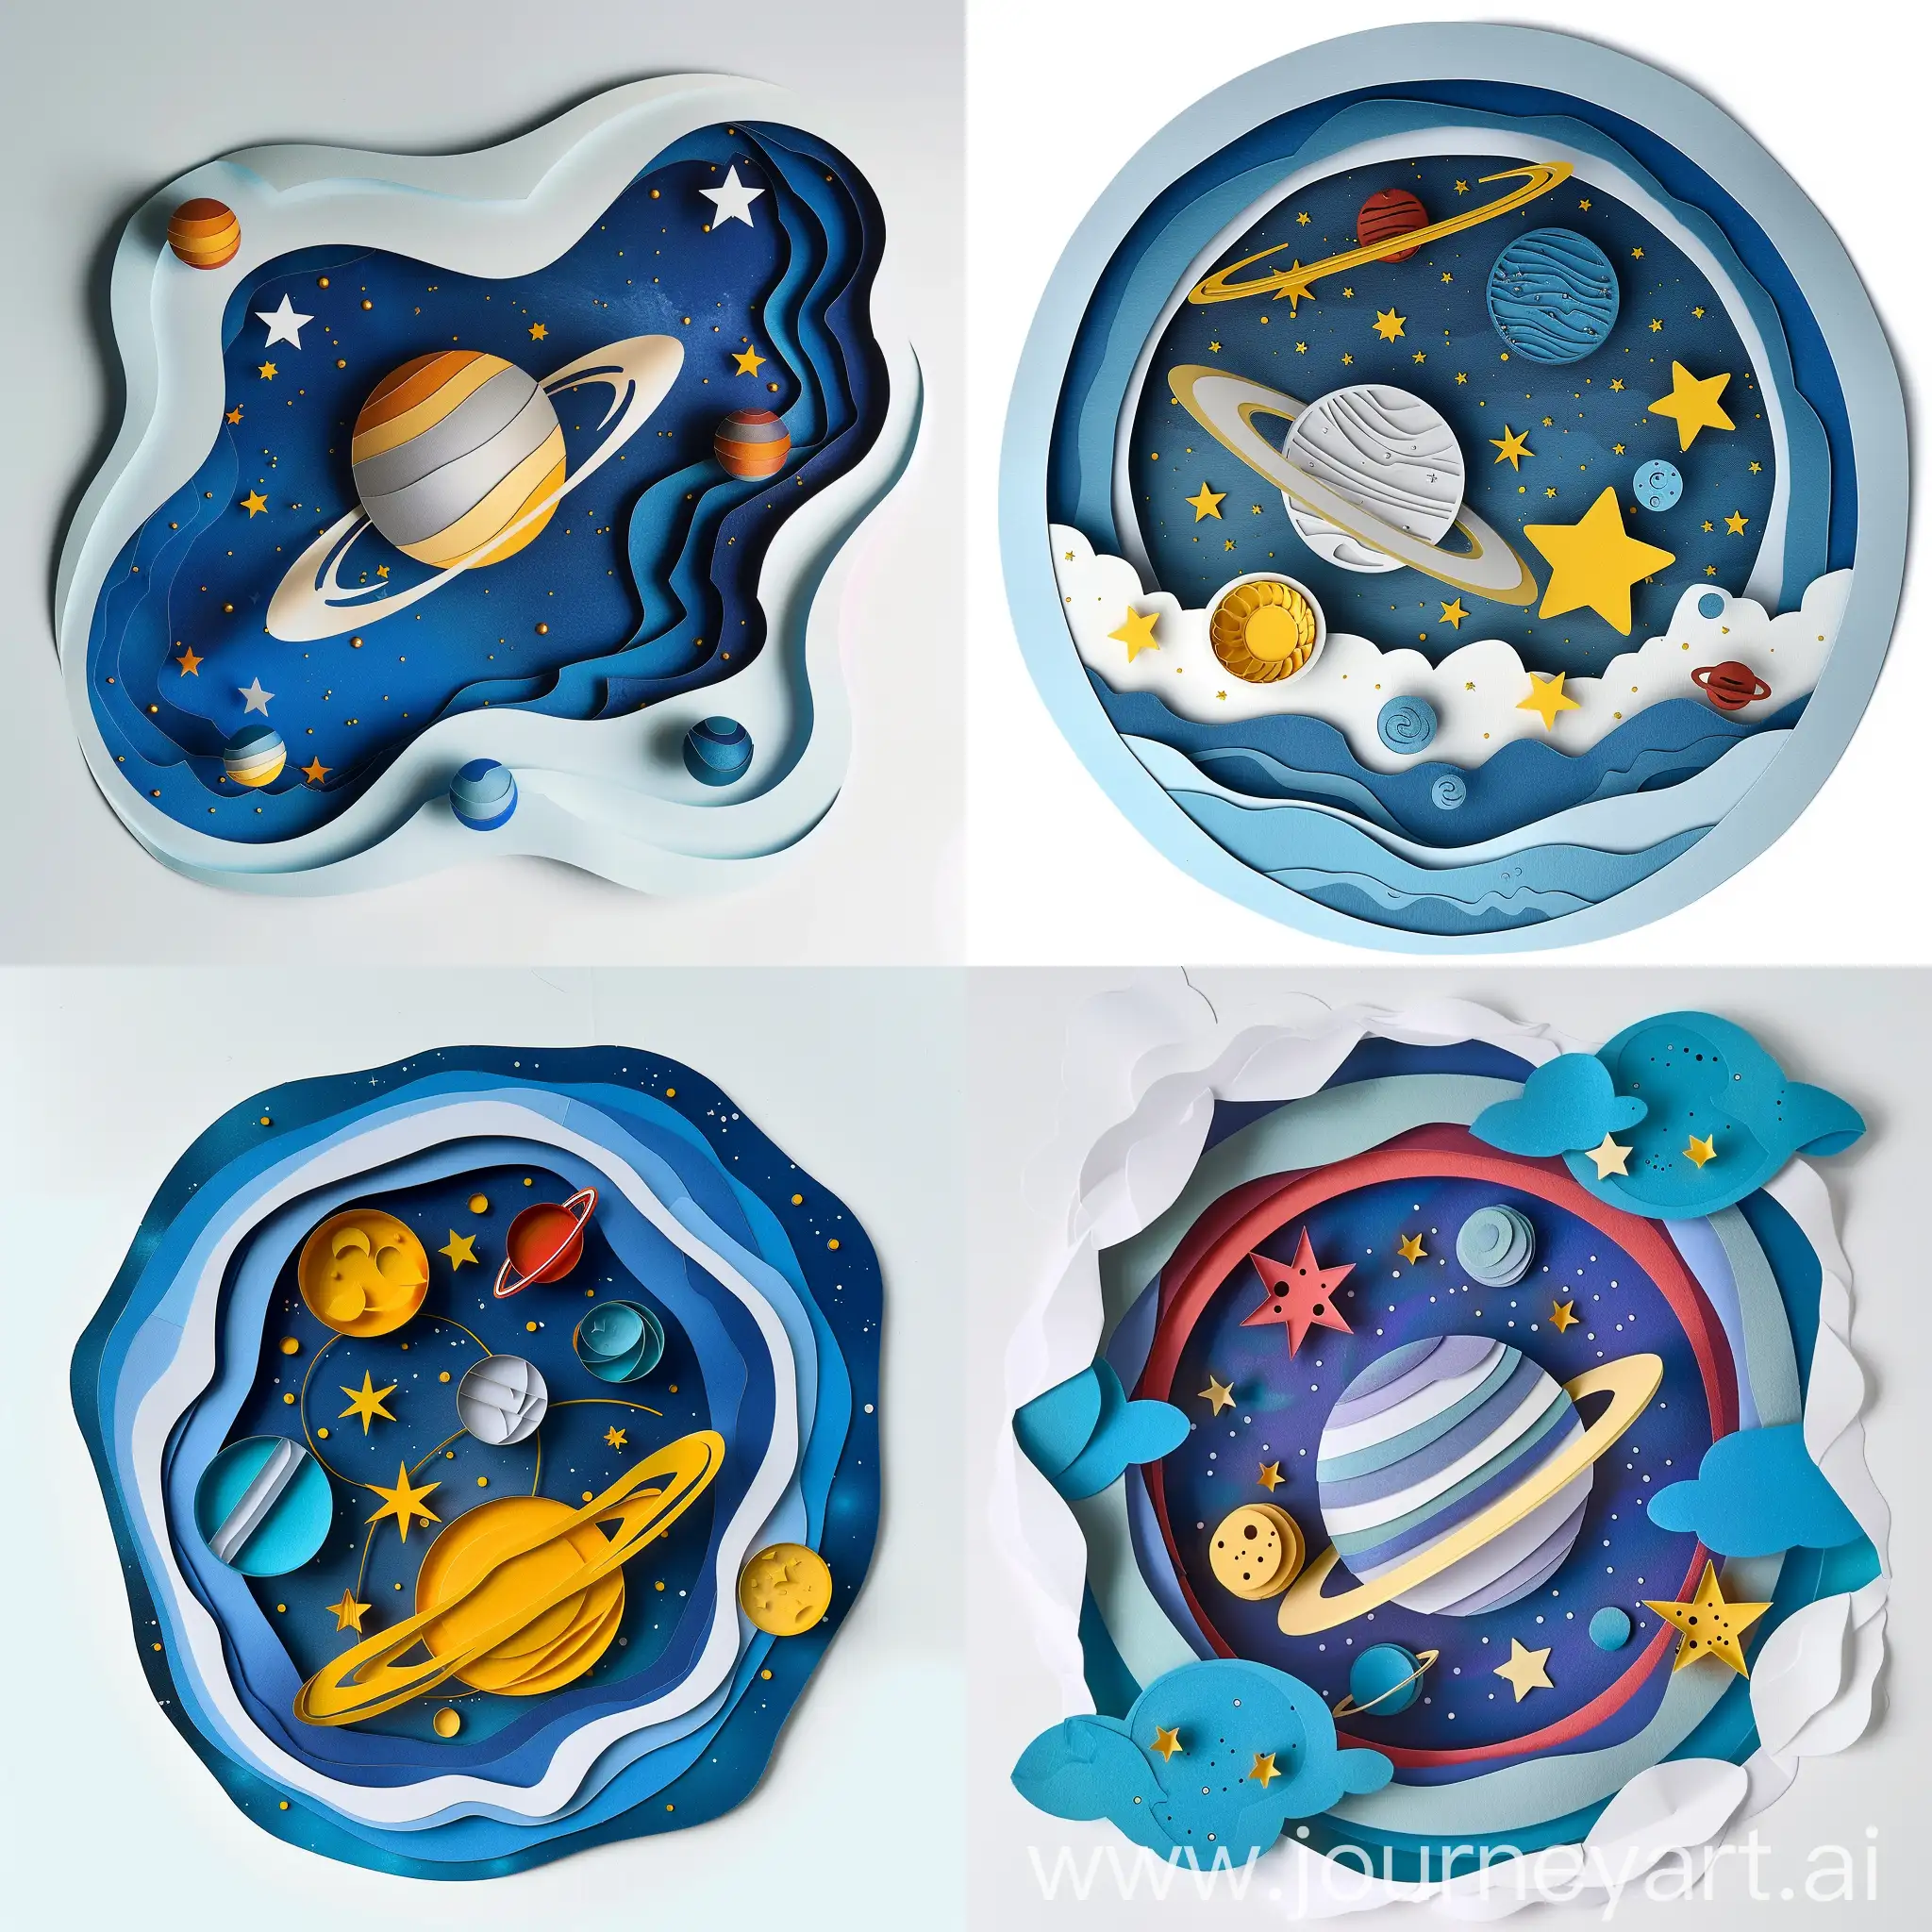 Paper-Cut-Cosmos-MultiLayered-Applique-with-Planets-and-Stars